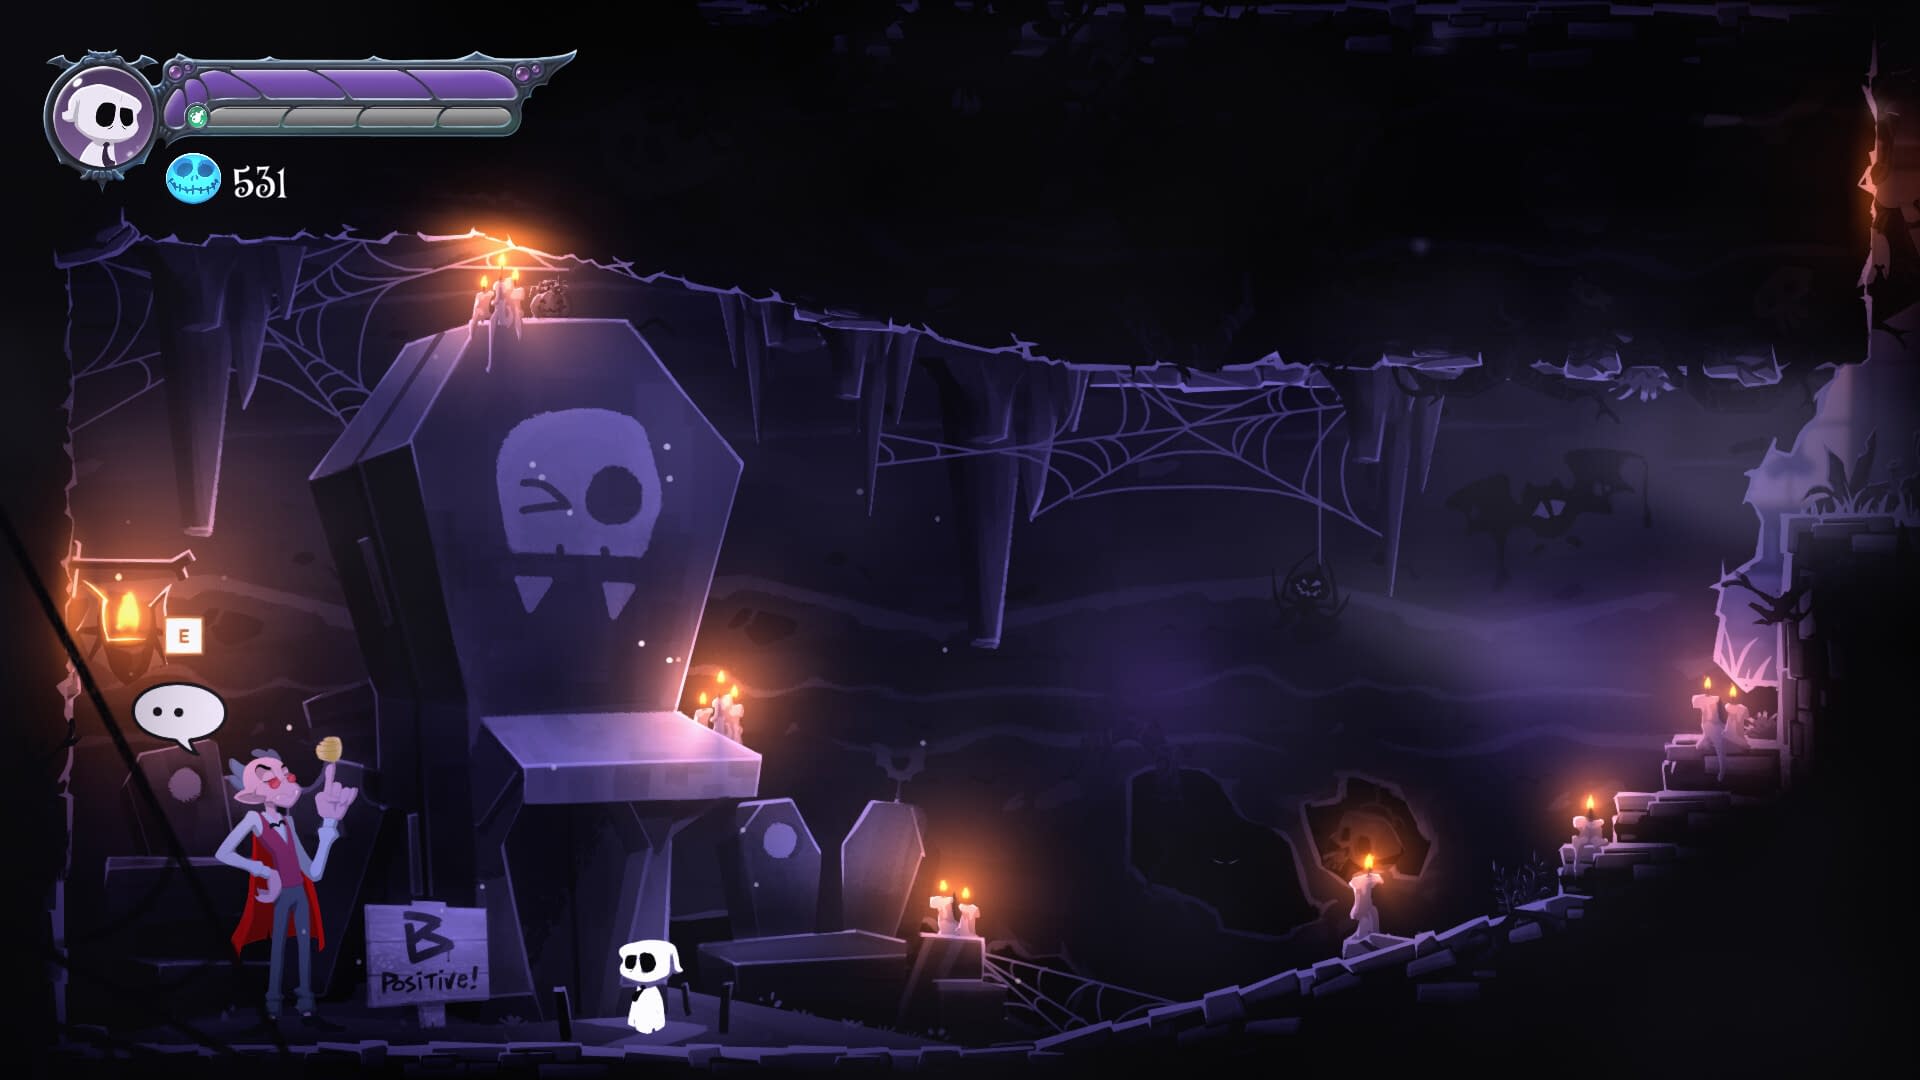 Ori and the Blind Forest-like Death or Treat comes in May 5